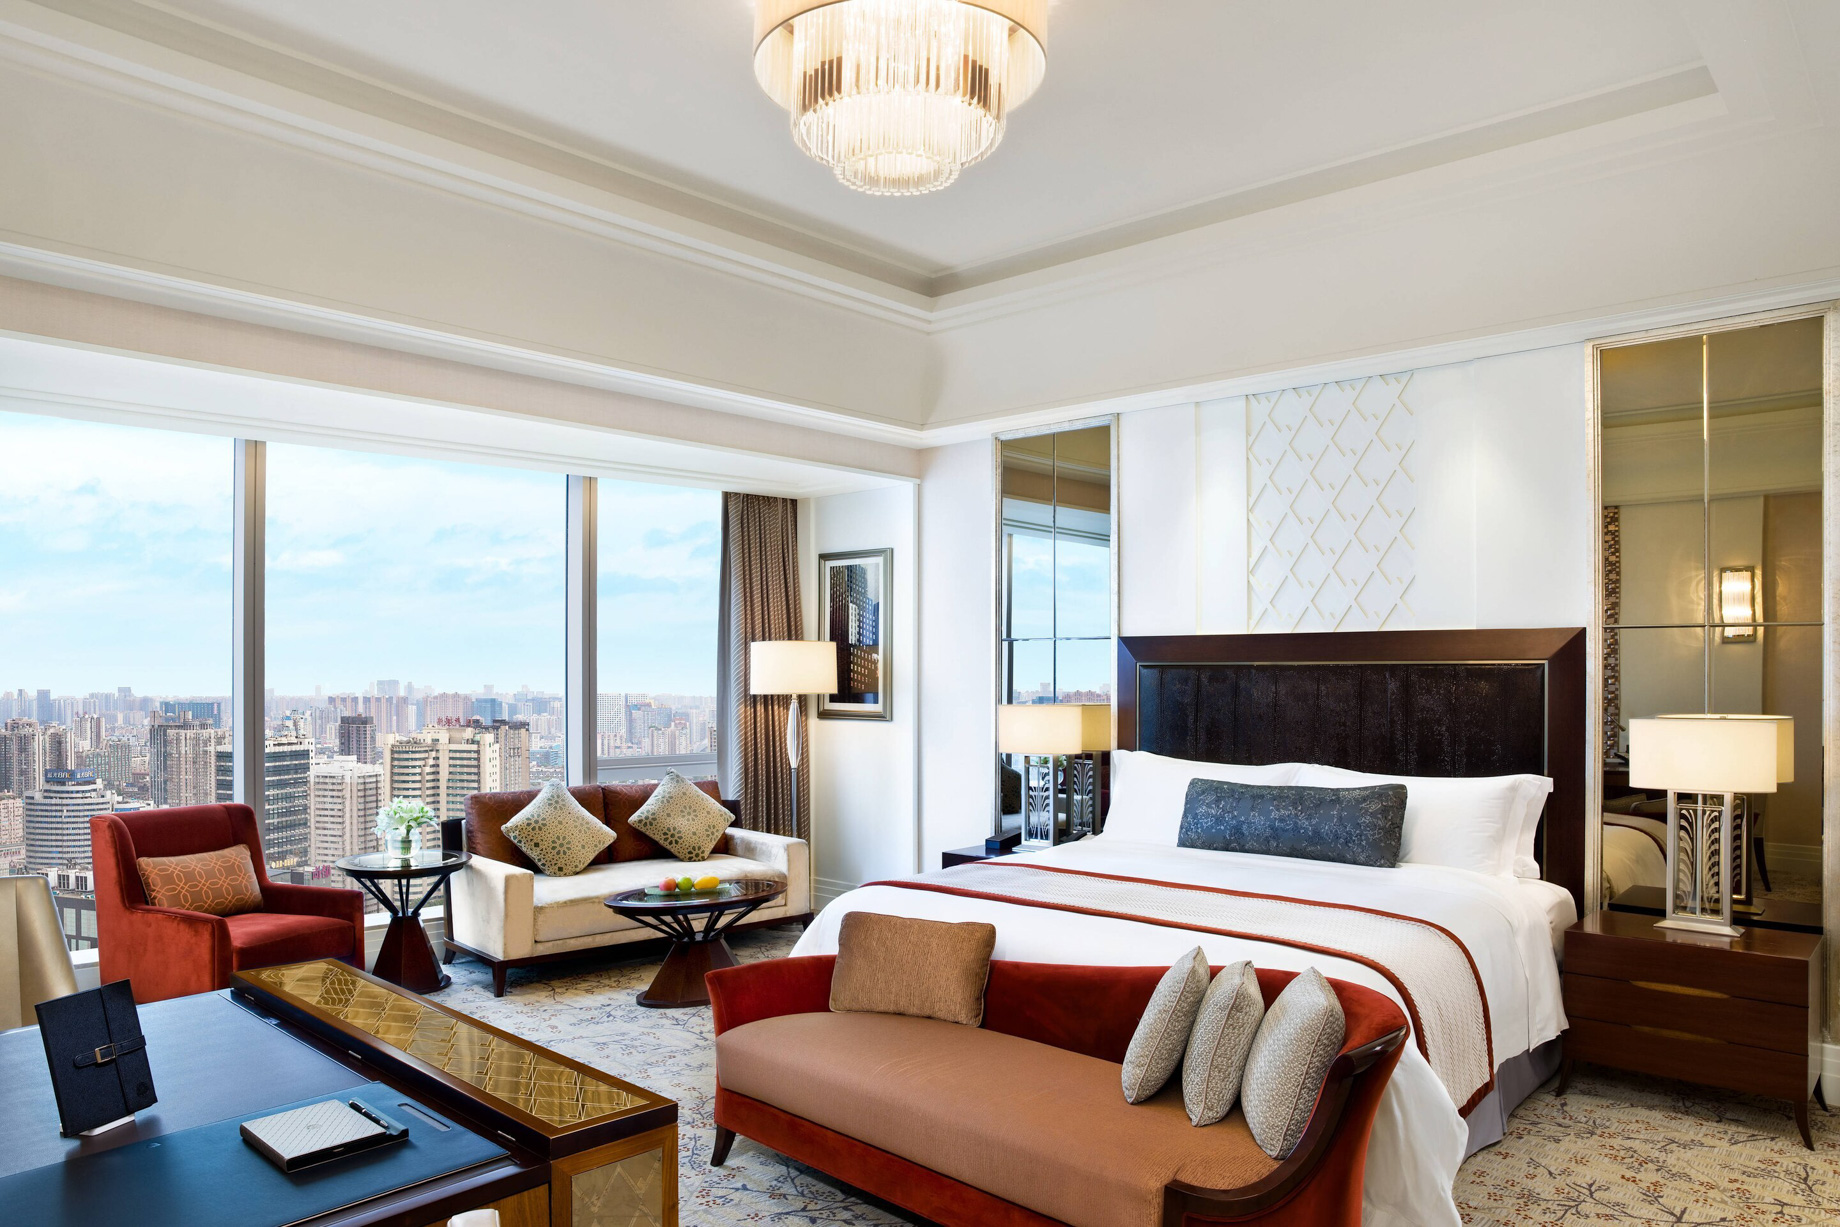 The St. Regis Chengdu Hotel – Chengdu, Sichuan, China – Grand Deluxe Room with City View